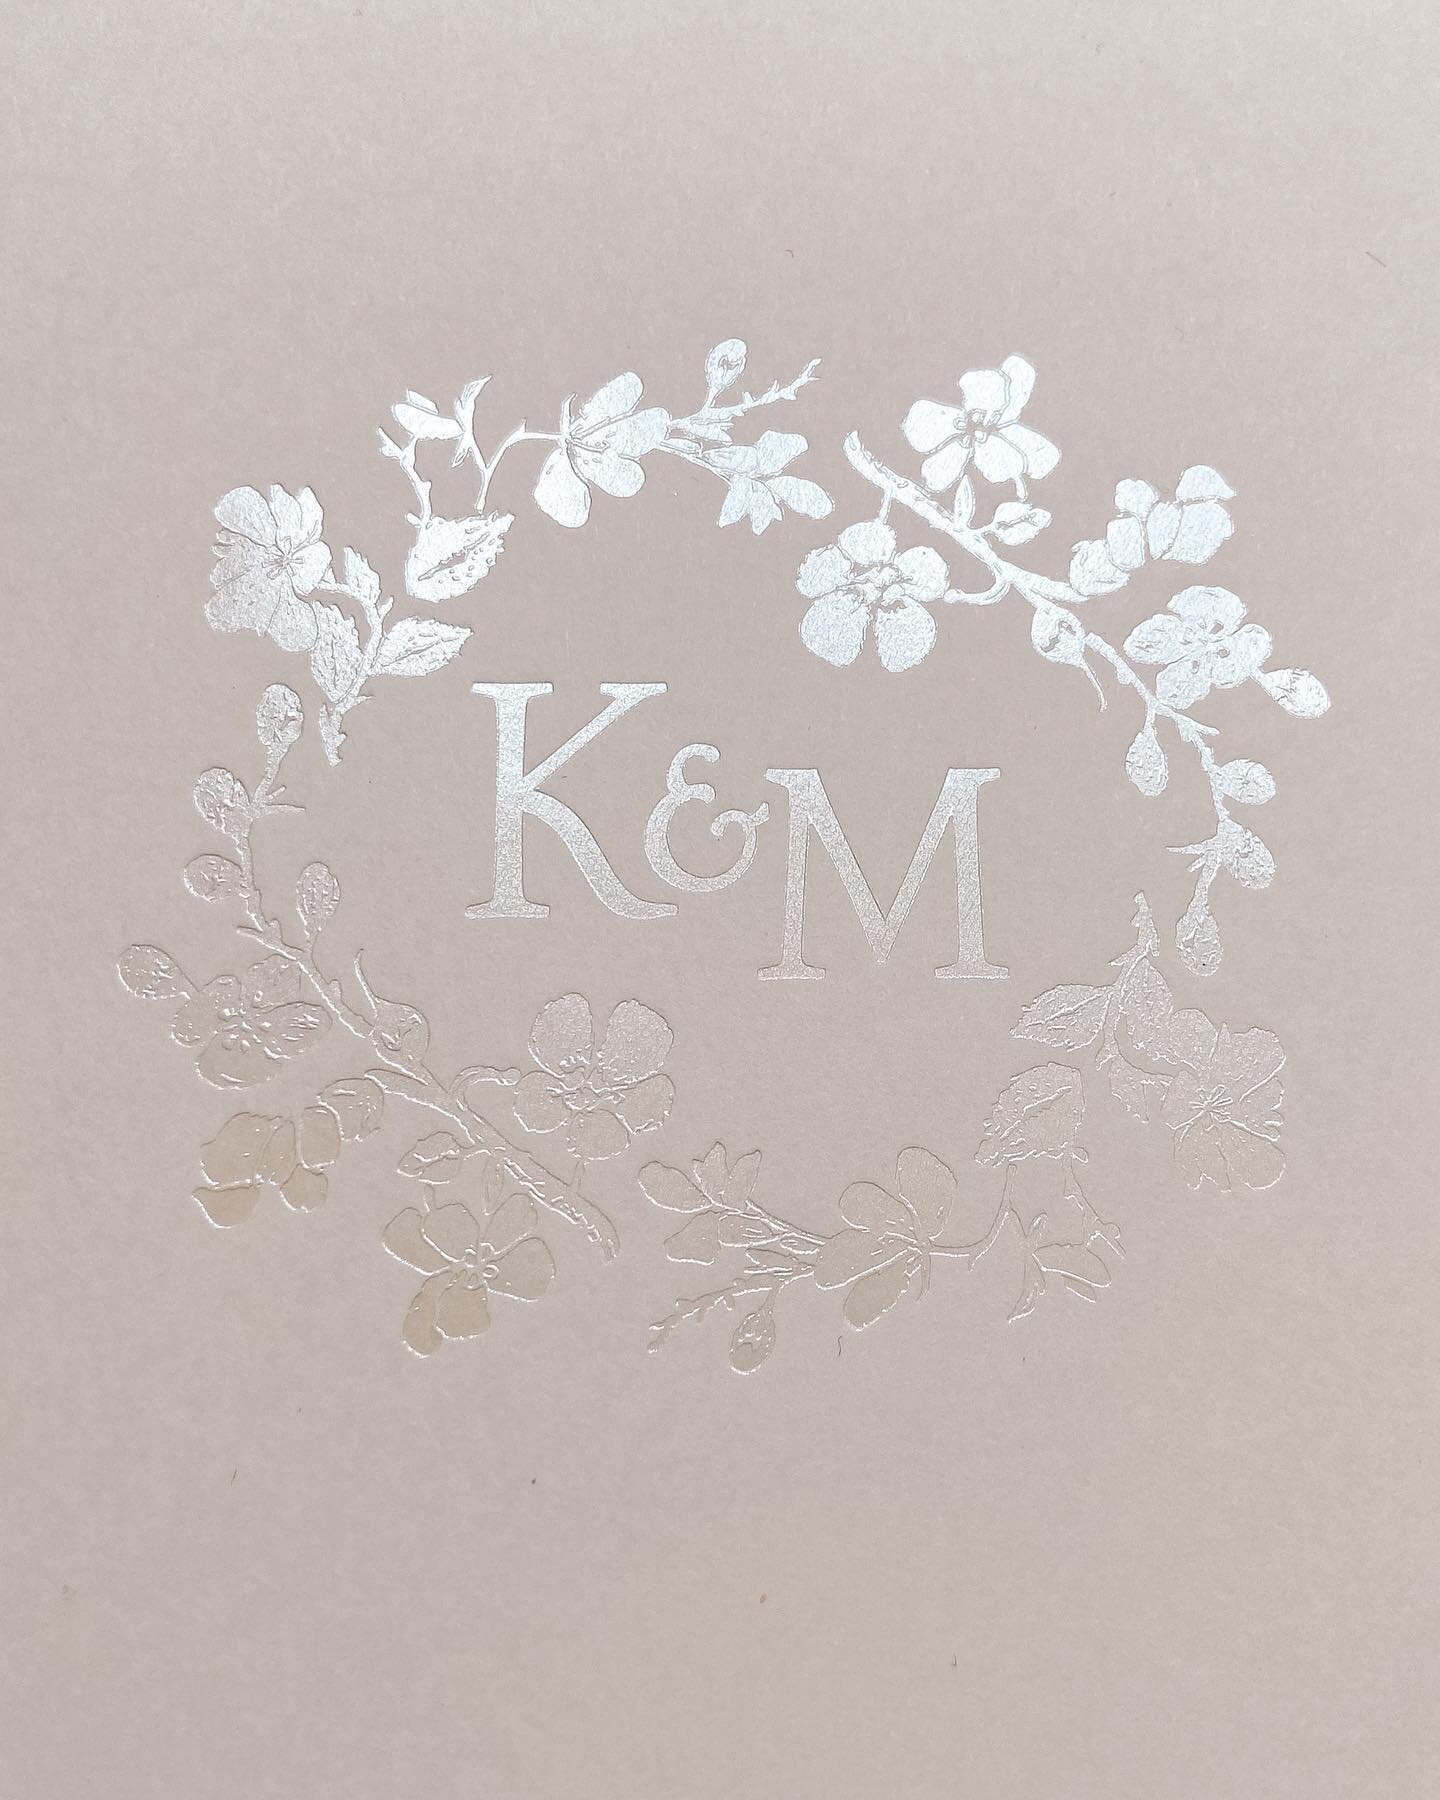 Kelly + Matt&rsquo;s wedding stationery set the tone for their luxe, modern-meets-romantic soir&eacute;e with @lyndenlane at the Ritz Carlton in Laguna Niguel, California. After multiple postponements and venue changes over the course of pandemic mad